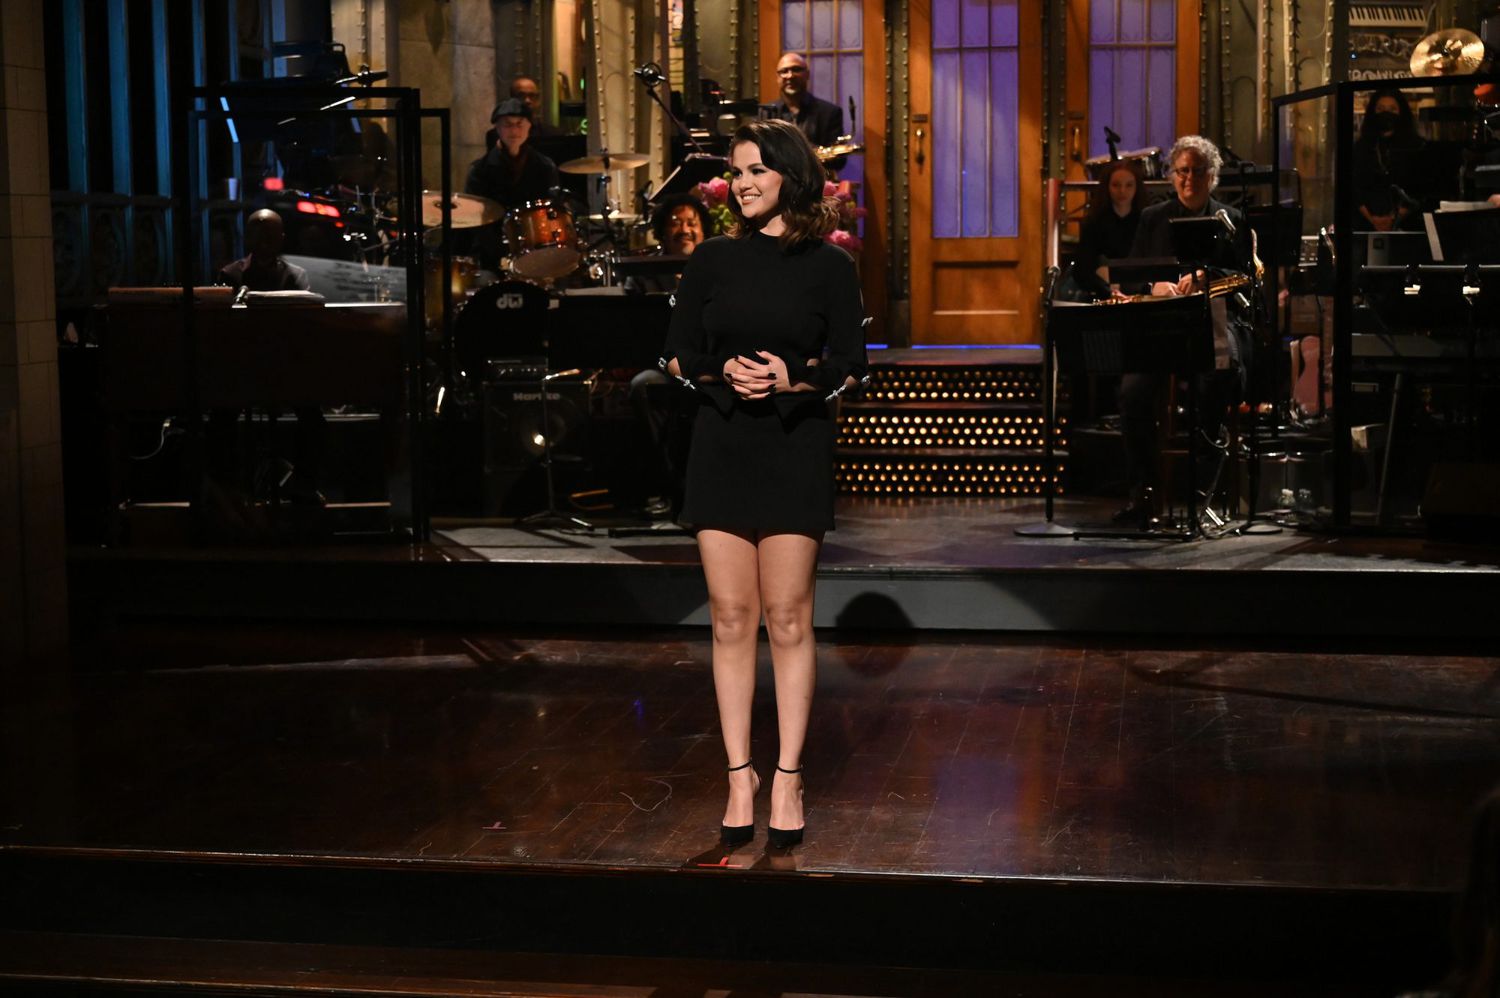 SATURDAY NIGHT LIVE -- Selena Gomez, Post Malone Episode 1825 -- Pictured: Host Selena Gomez during the monologue on Saturday, May 14, 2022 -- (Photo by: Will Heath/NBC/NBCU Photo Bank via Getty Images)